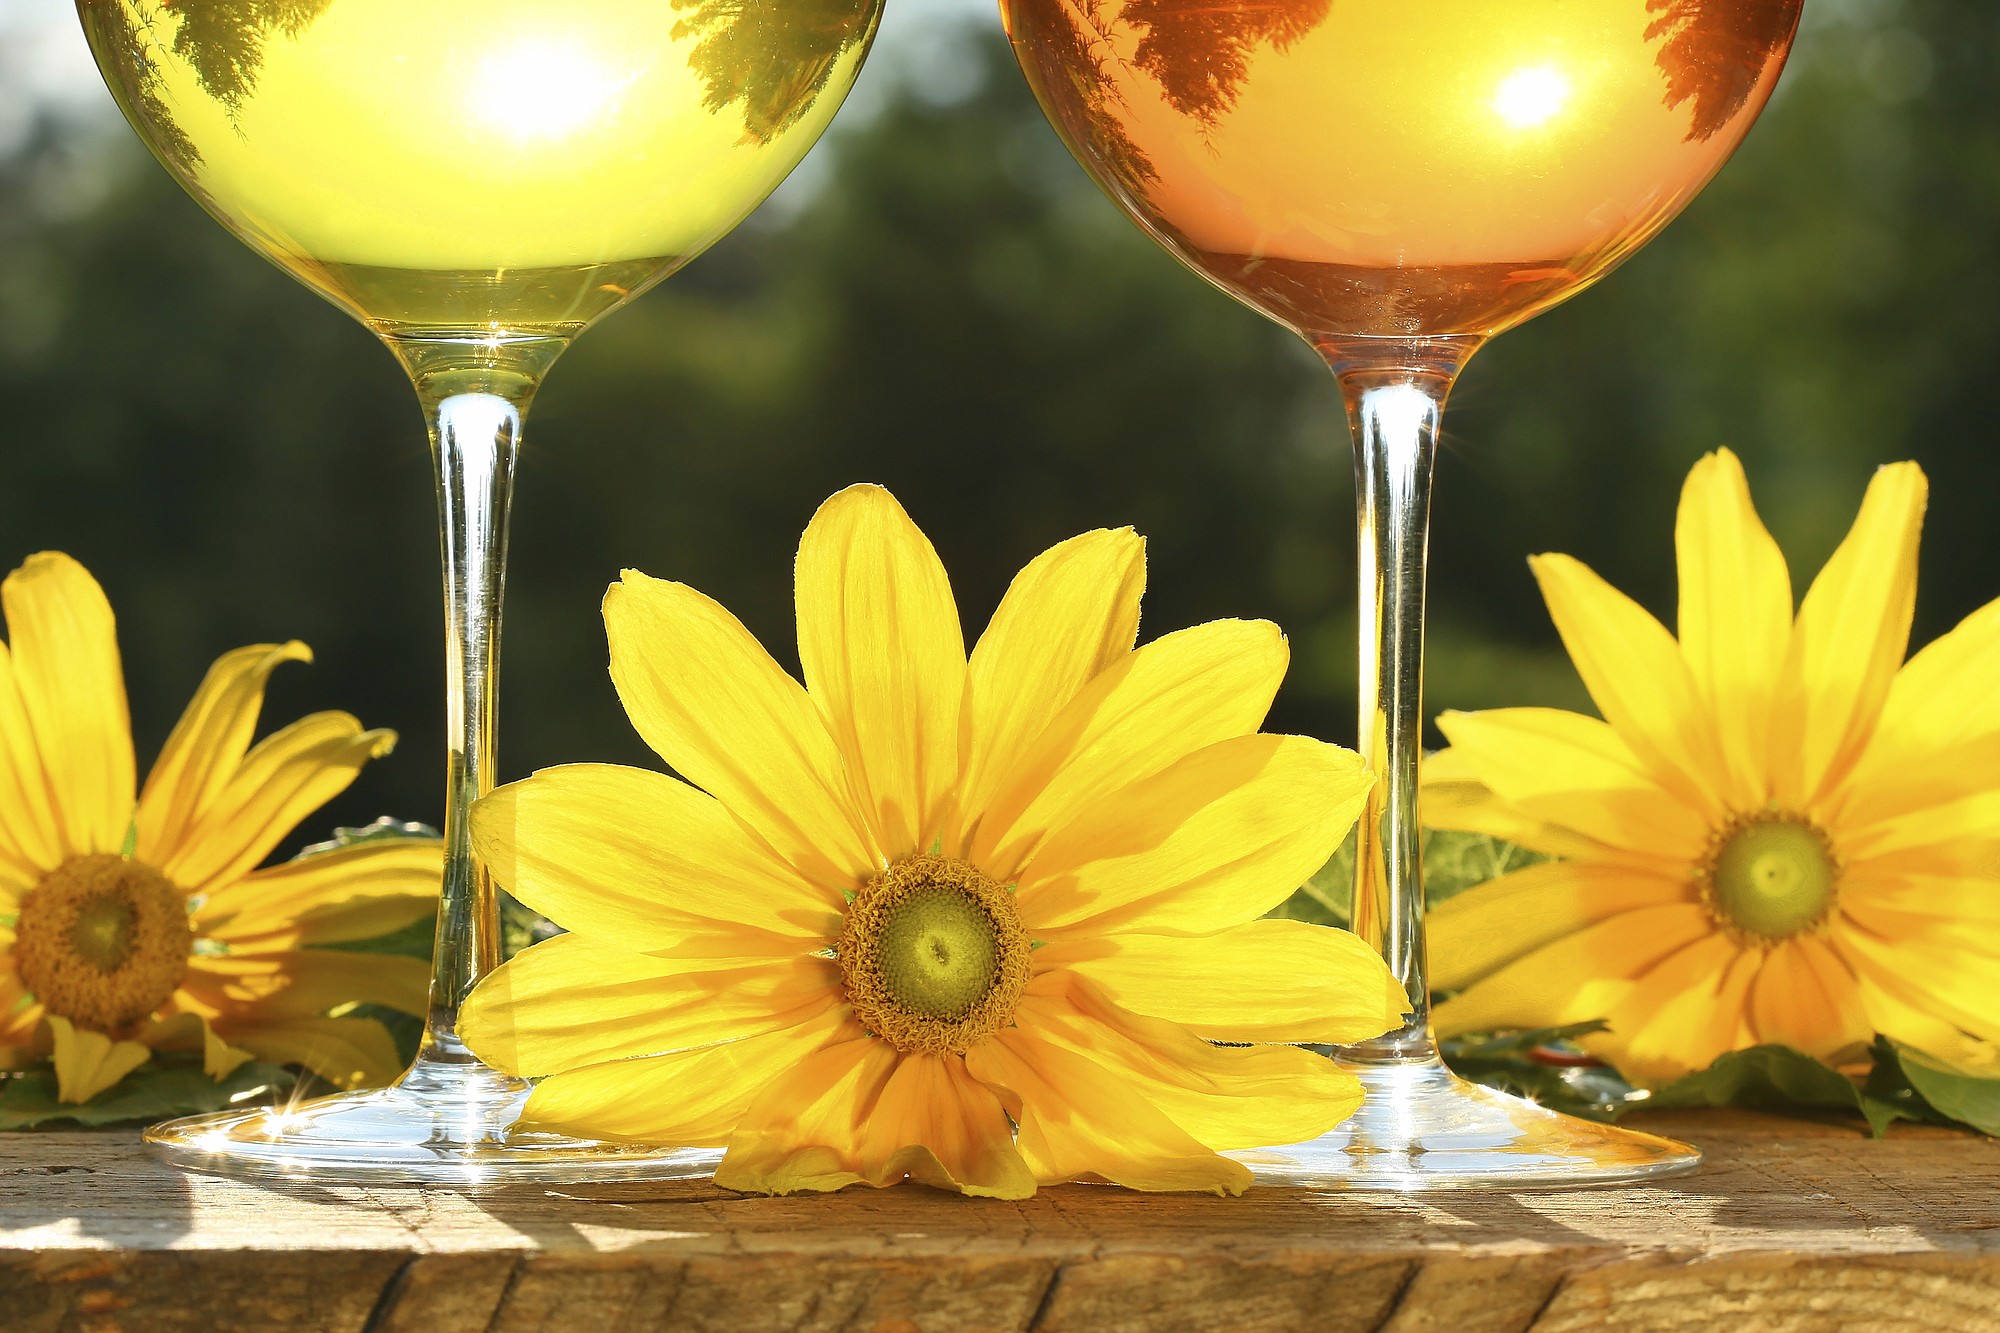 Golden wine in the sun on rustic table